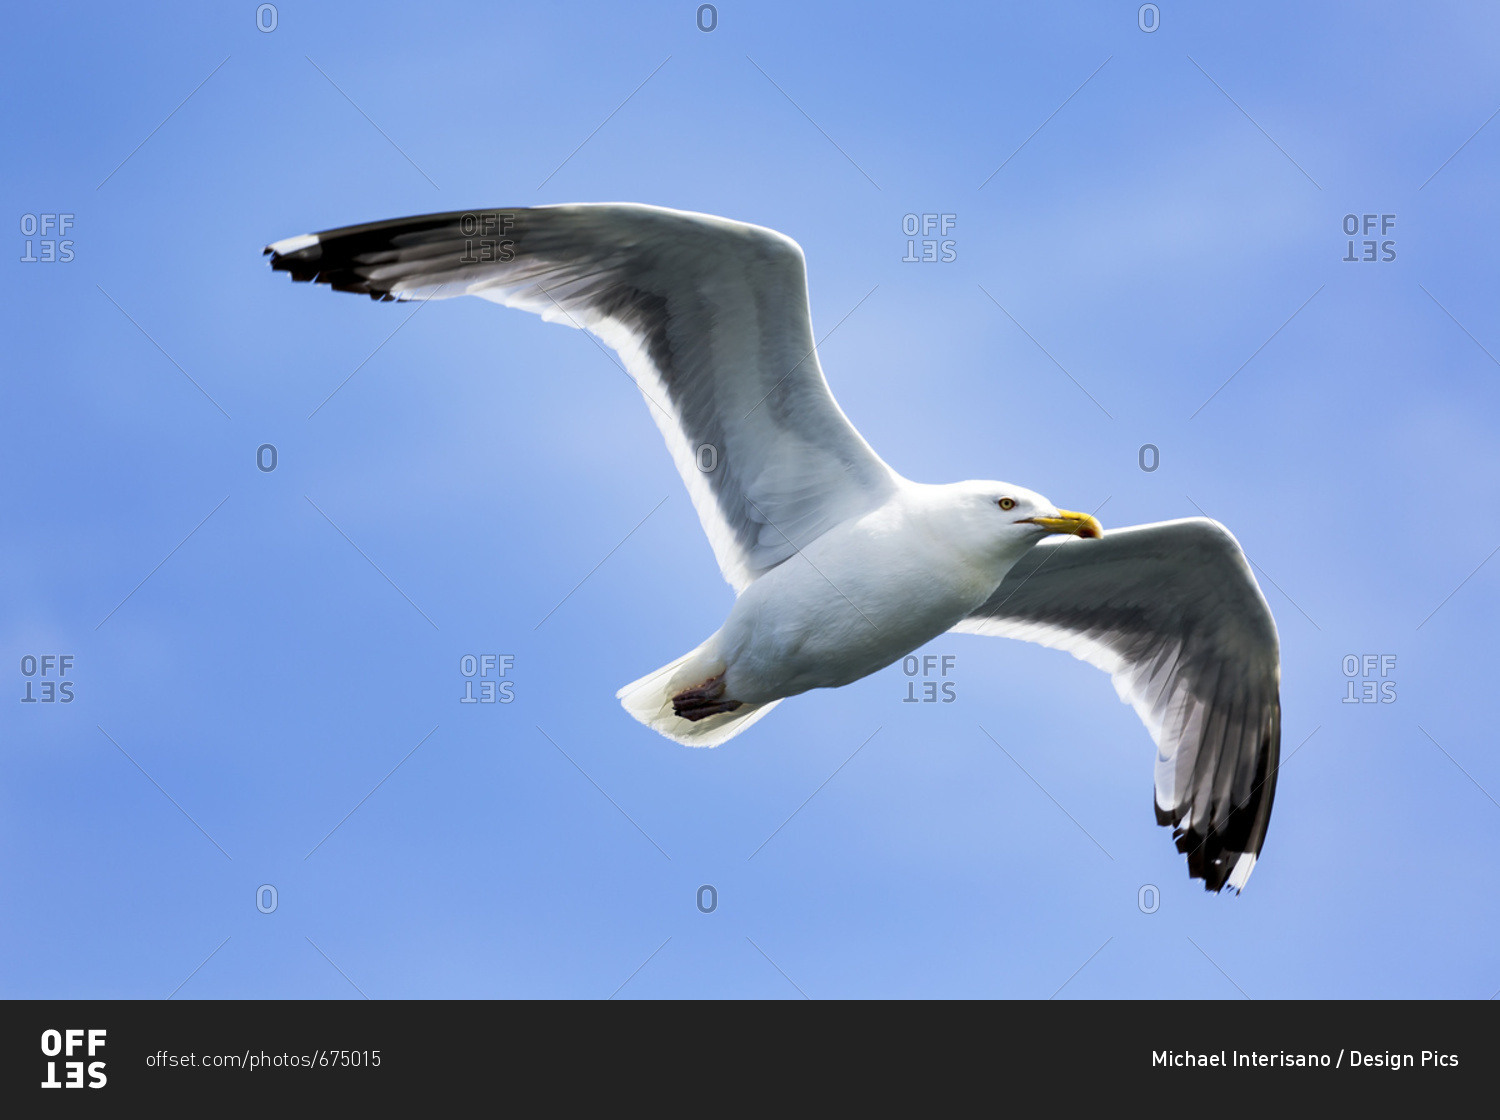 Seal Cove, New Brunswick, Canada - August 16, 2016: Close Up Of Seagull In Flight With Blue Sky; Seal Cove, New Brunswick, Canada